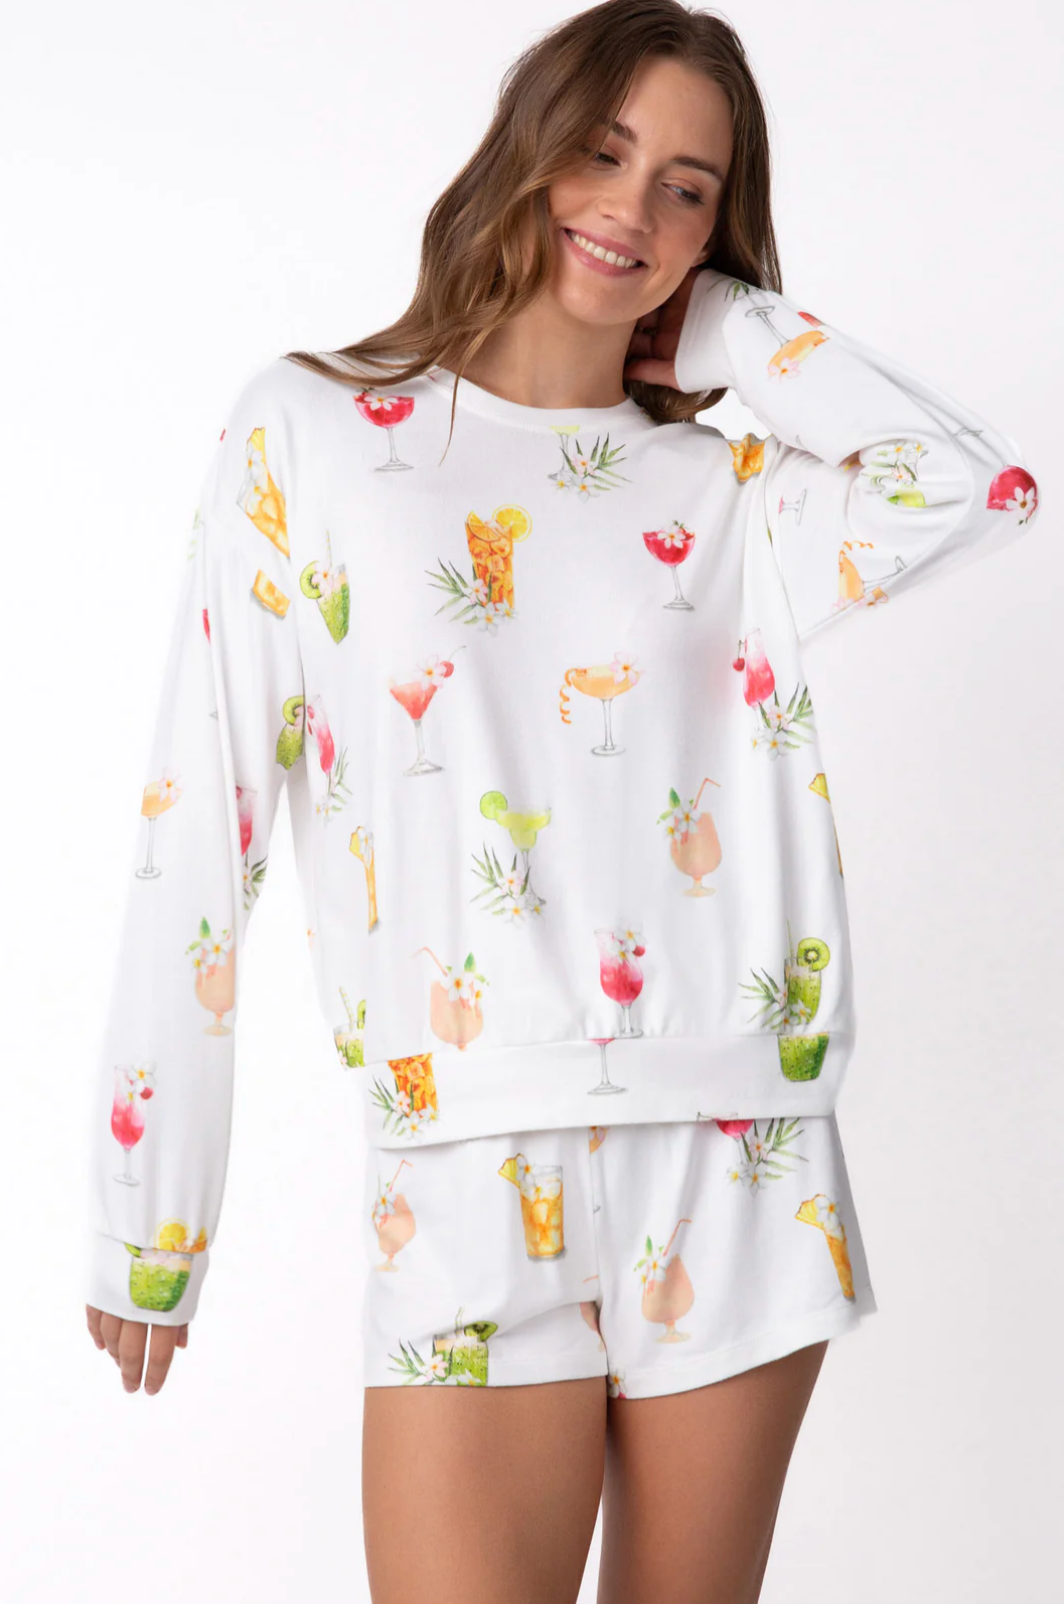 SIPPIN' ON SUNSHINE L/S TOP